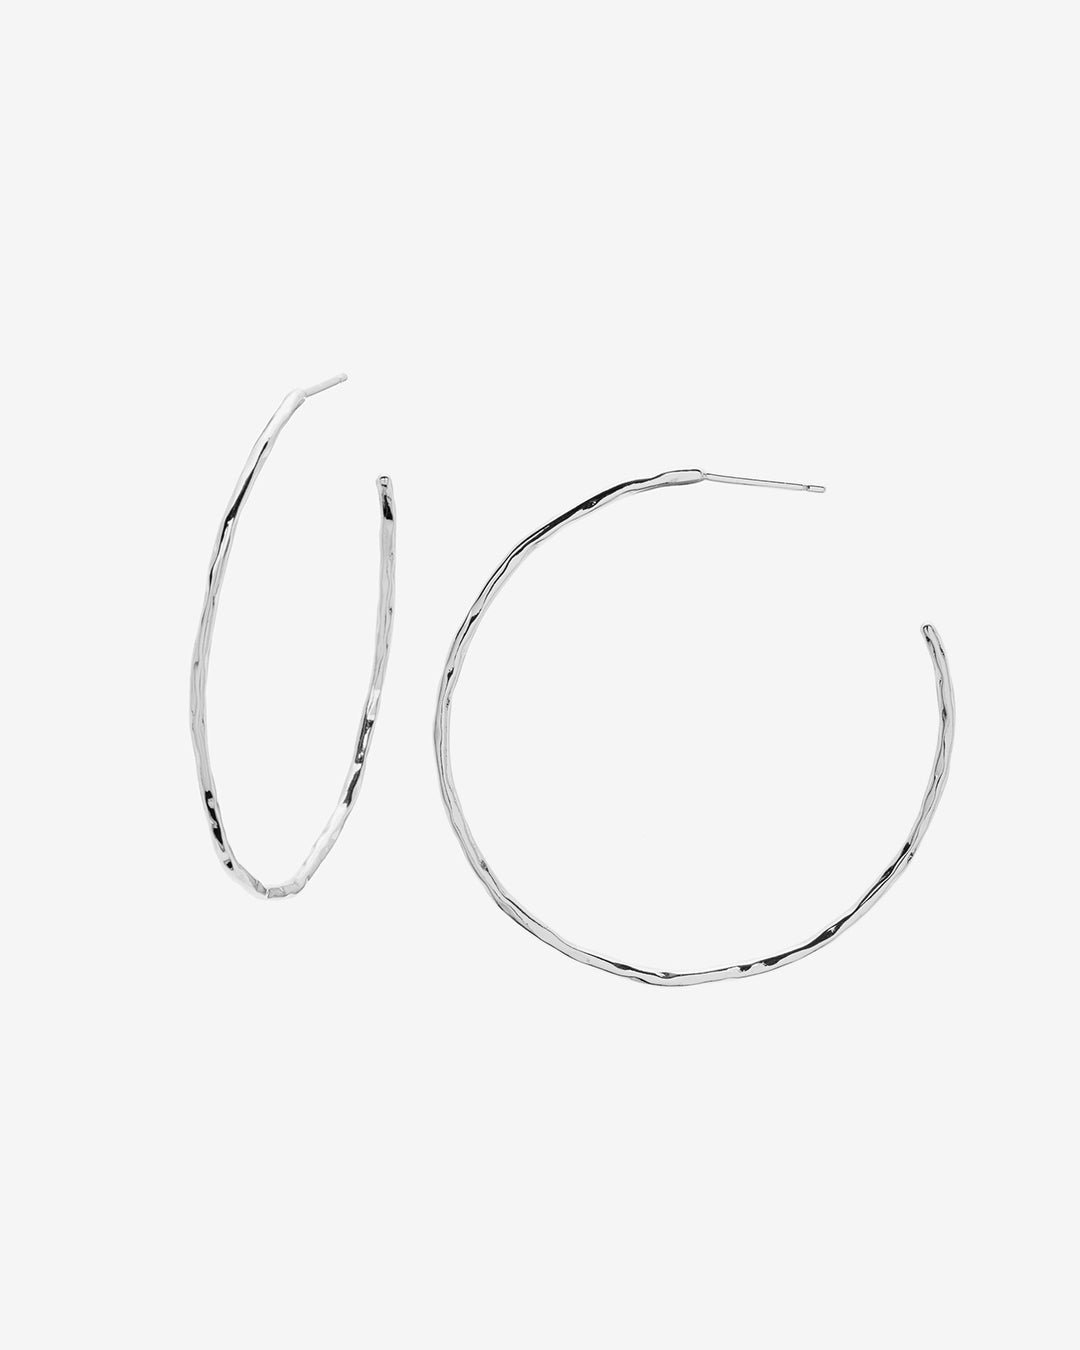  Taner Thin hoops, medium sized hoops || option::Silver Plated